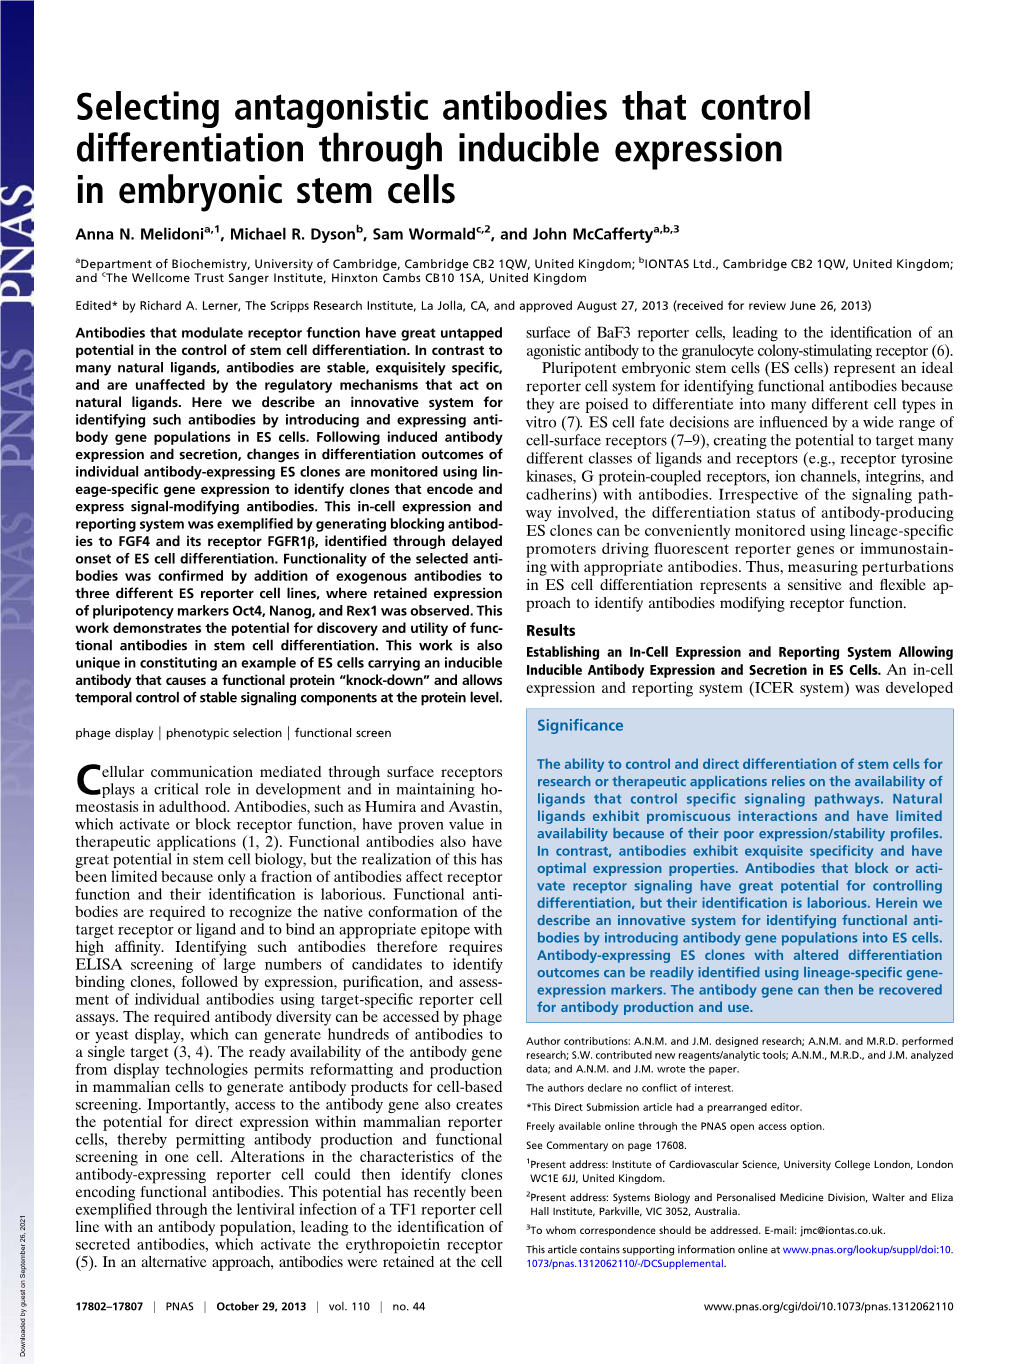 Selecting Antagonistic Antibodies That Control Differentiation Through Inducible Expression in Embryonic Stem Cells